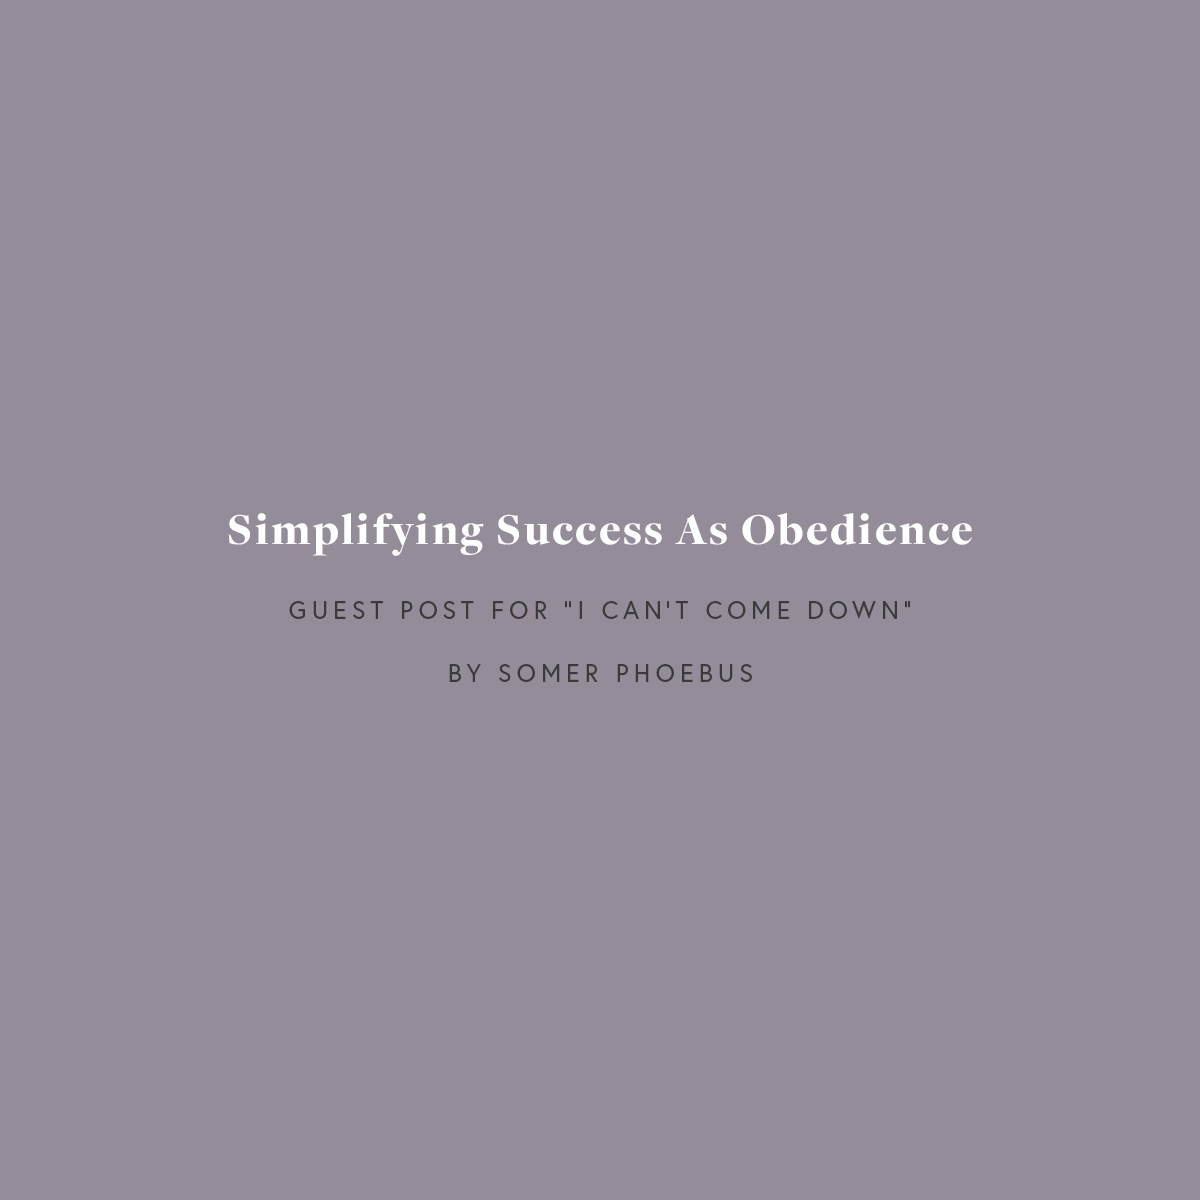 Simplifying Success As Obedience